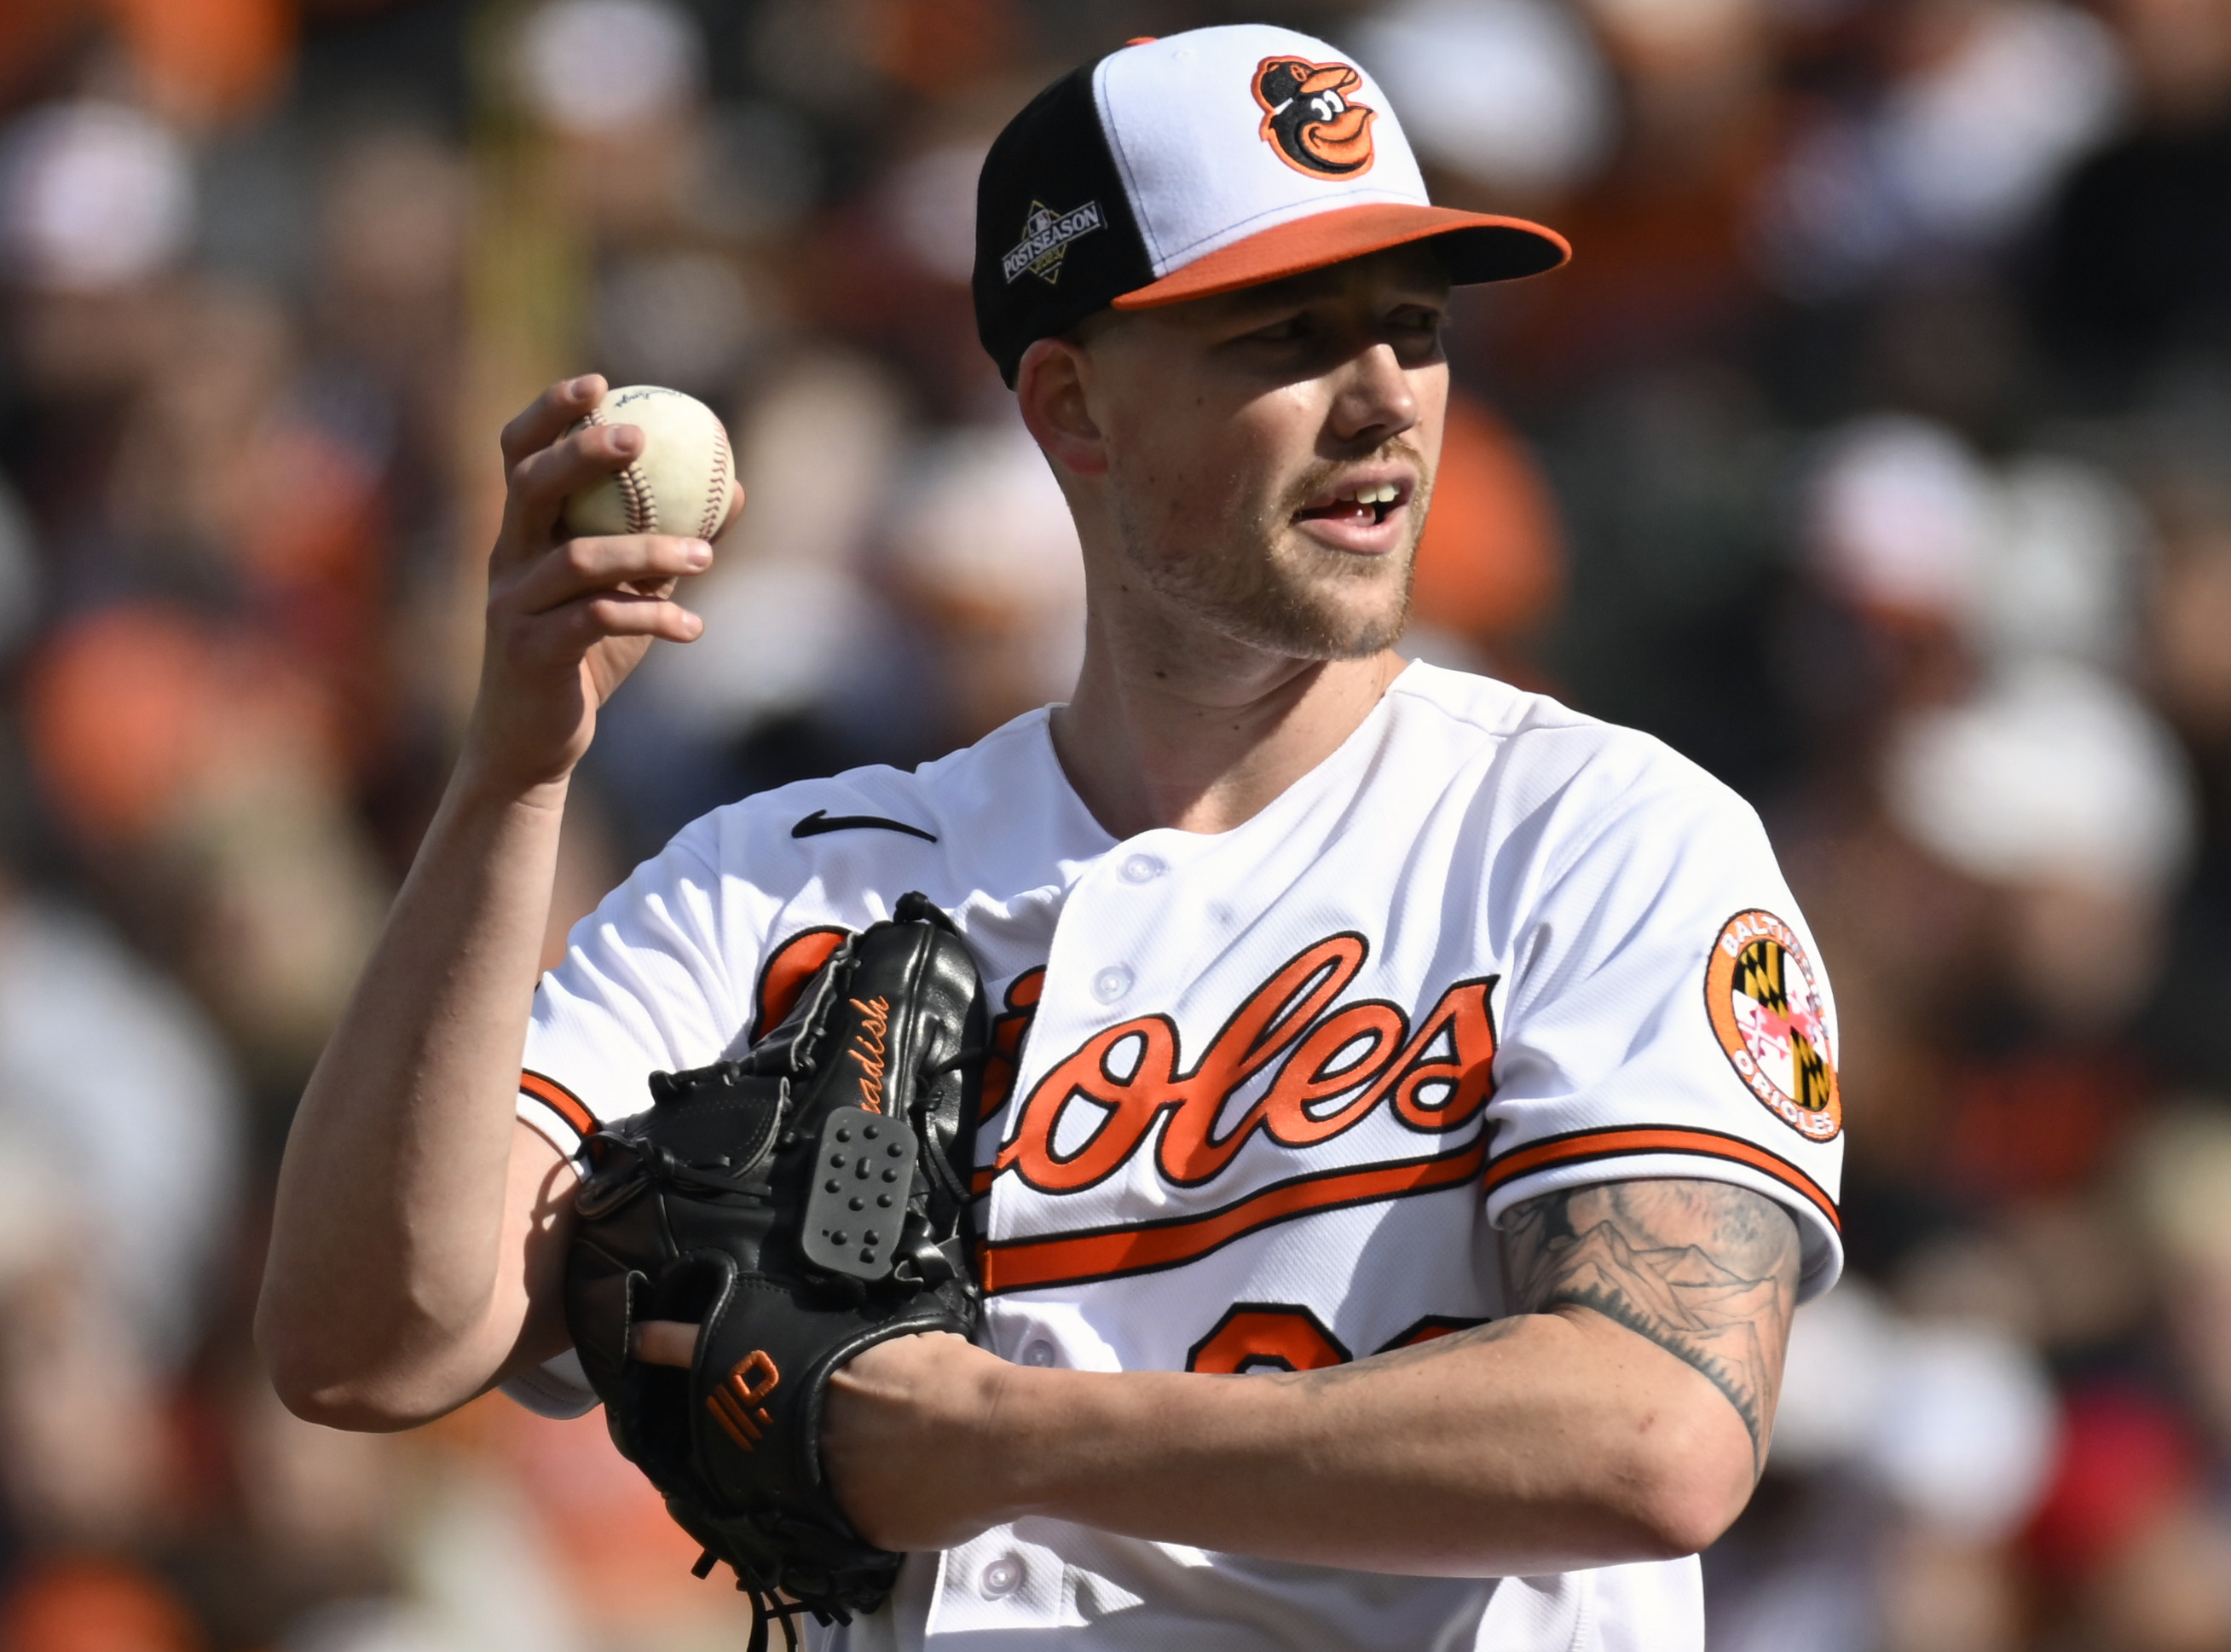 the orioles already lost an ace but they have options available